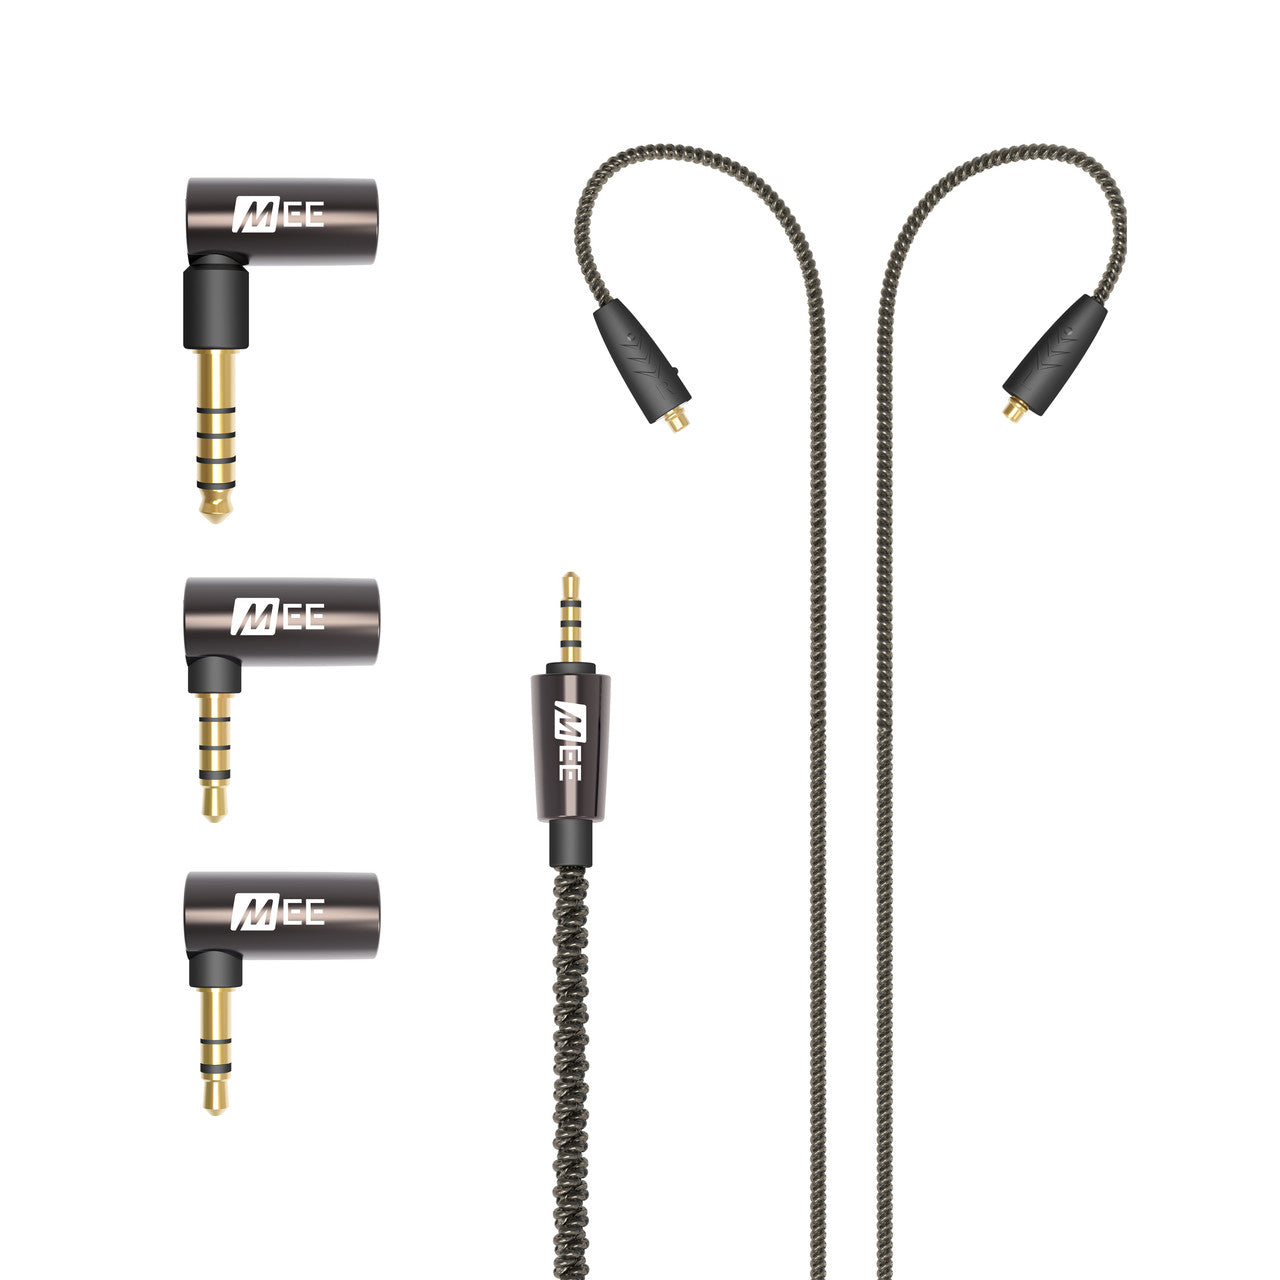 Pinnacle P1 Balanced Edition: Includes Balanced Cable and Adapter Set